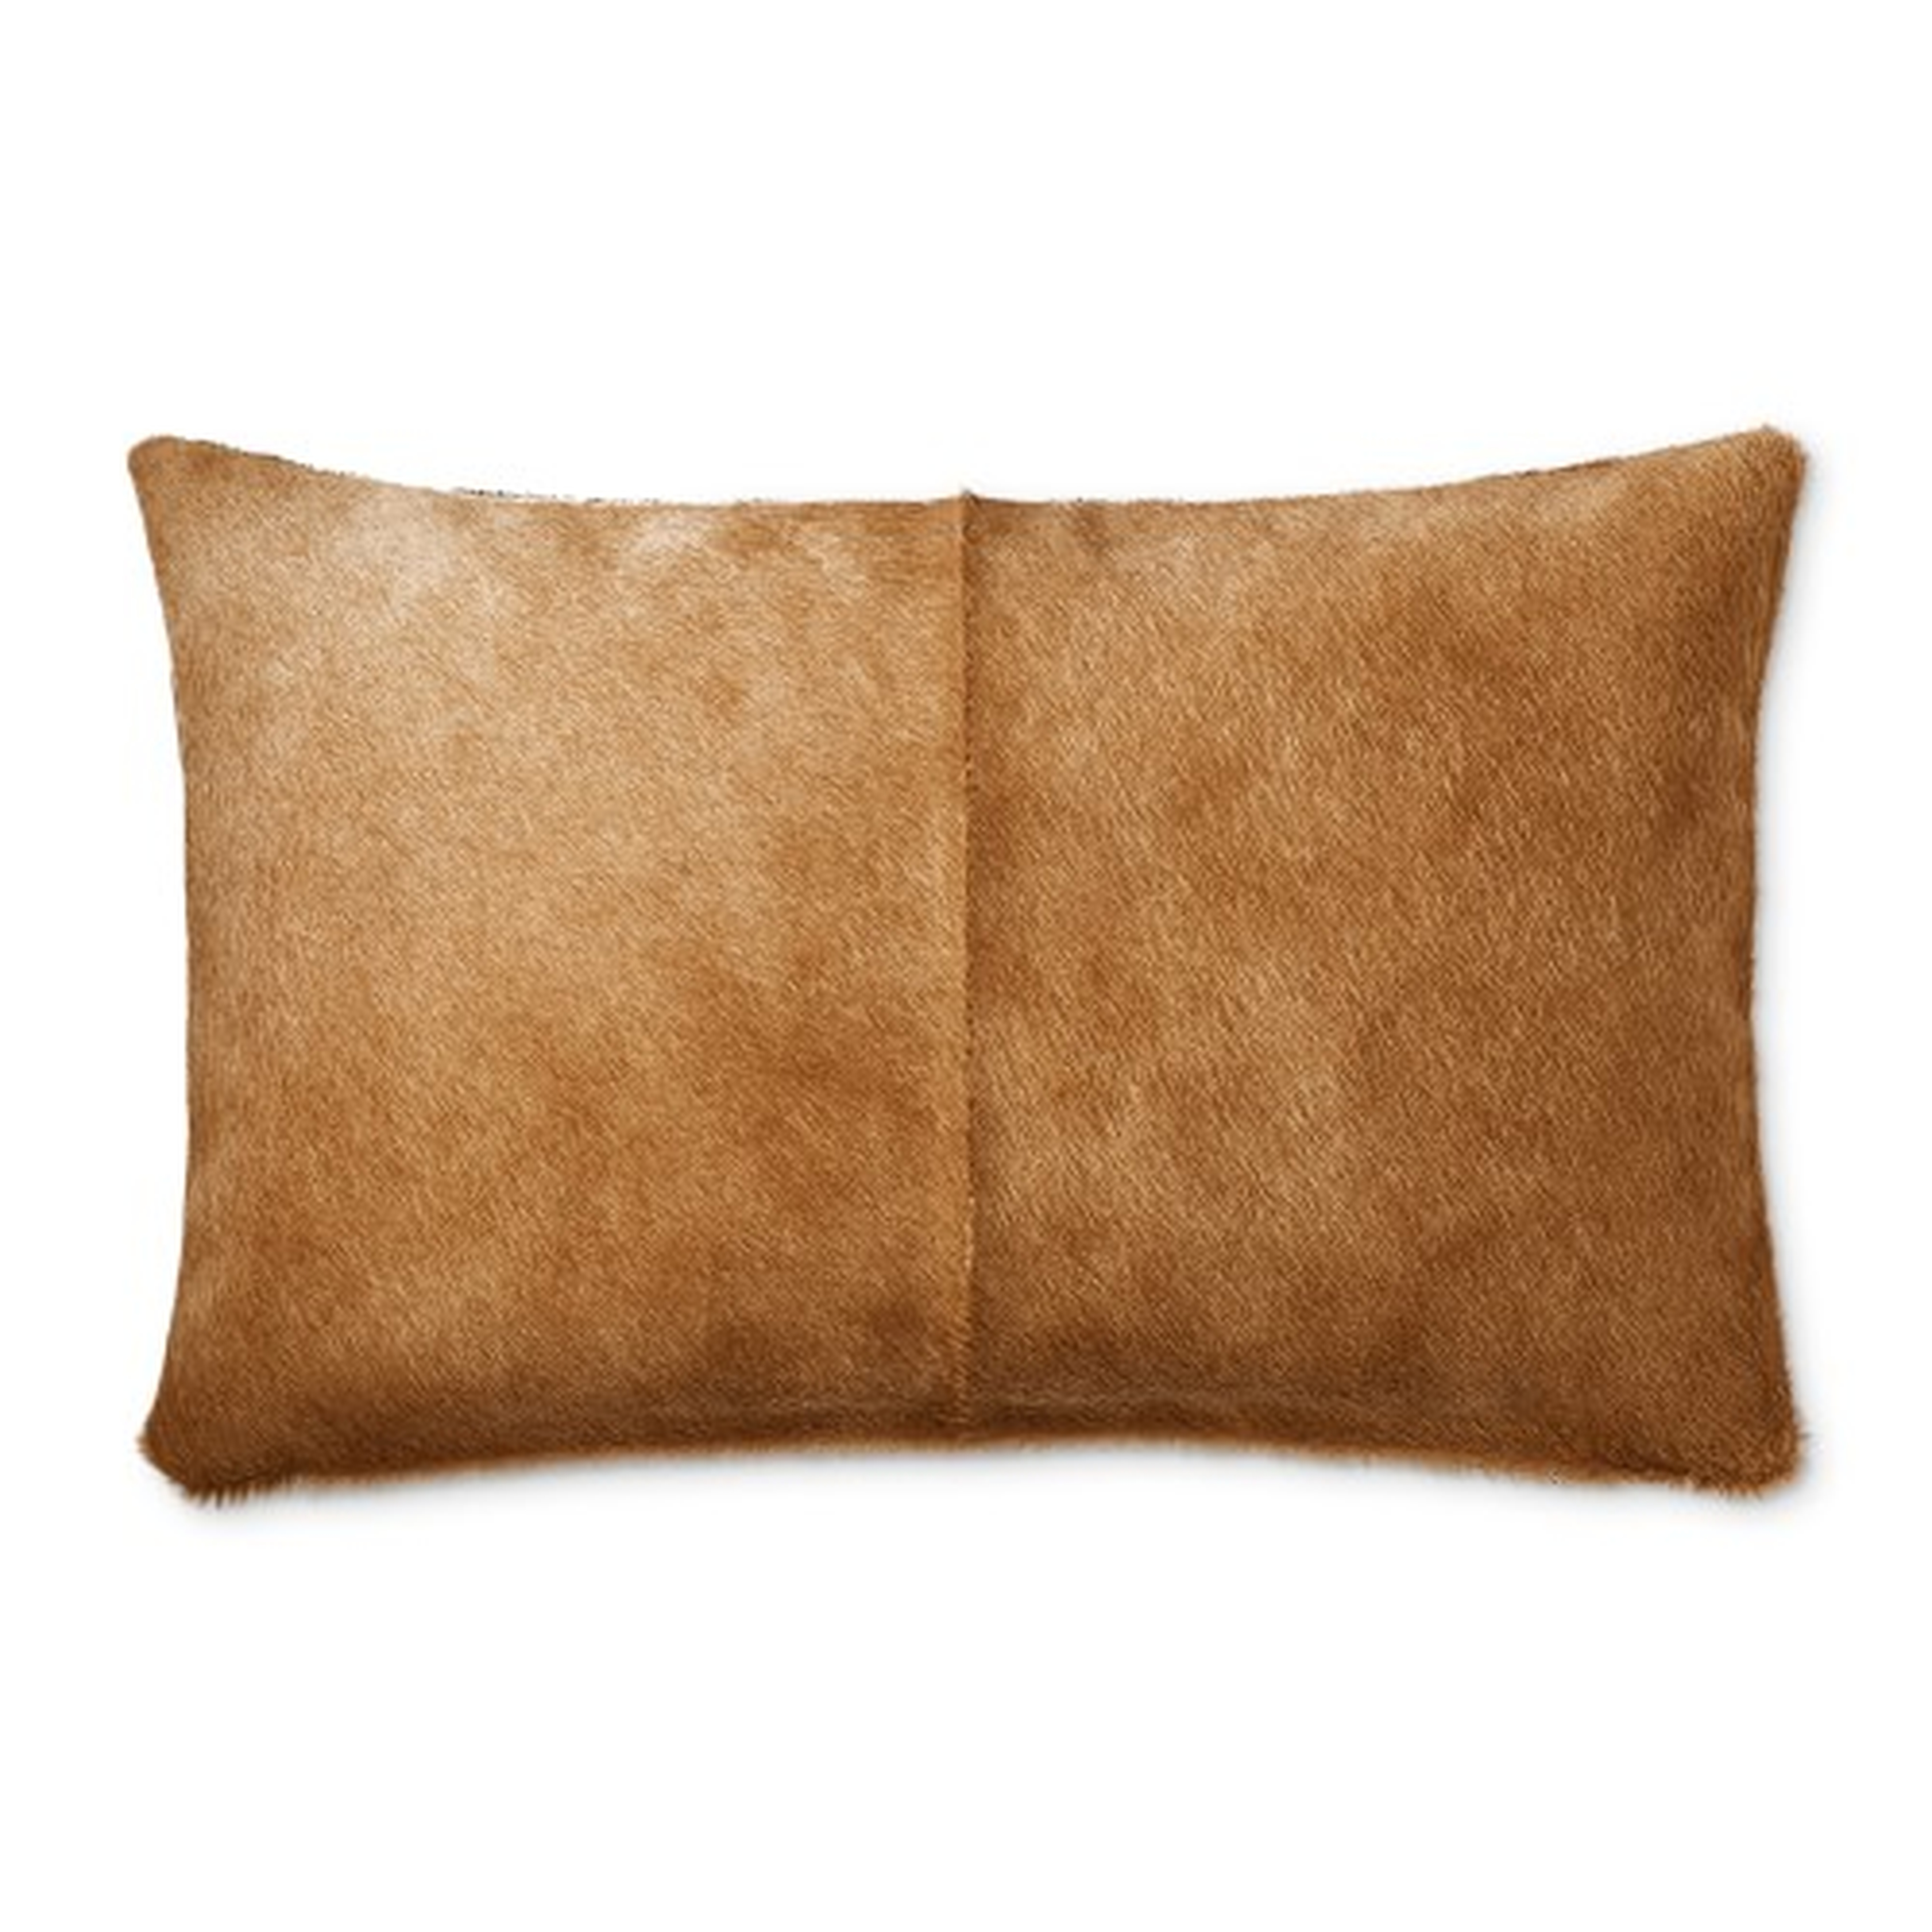 Solid Hide Pillow Cover, 14" x 22", Light Camel - Williams Sonoma